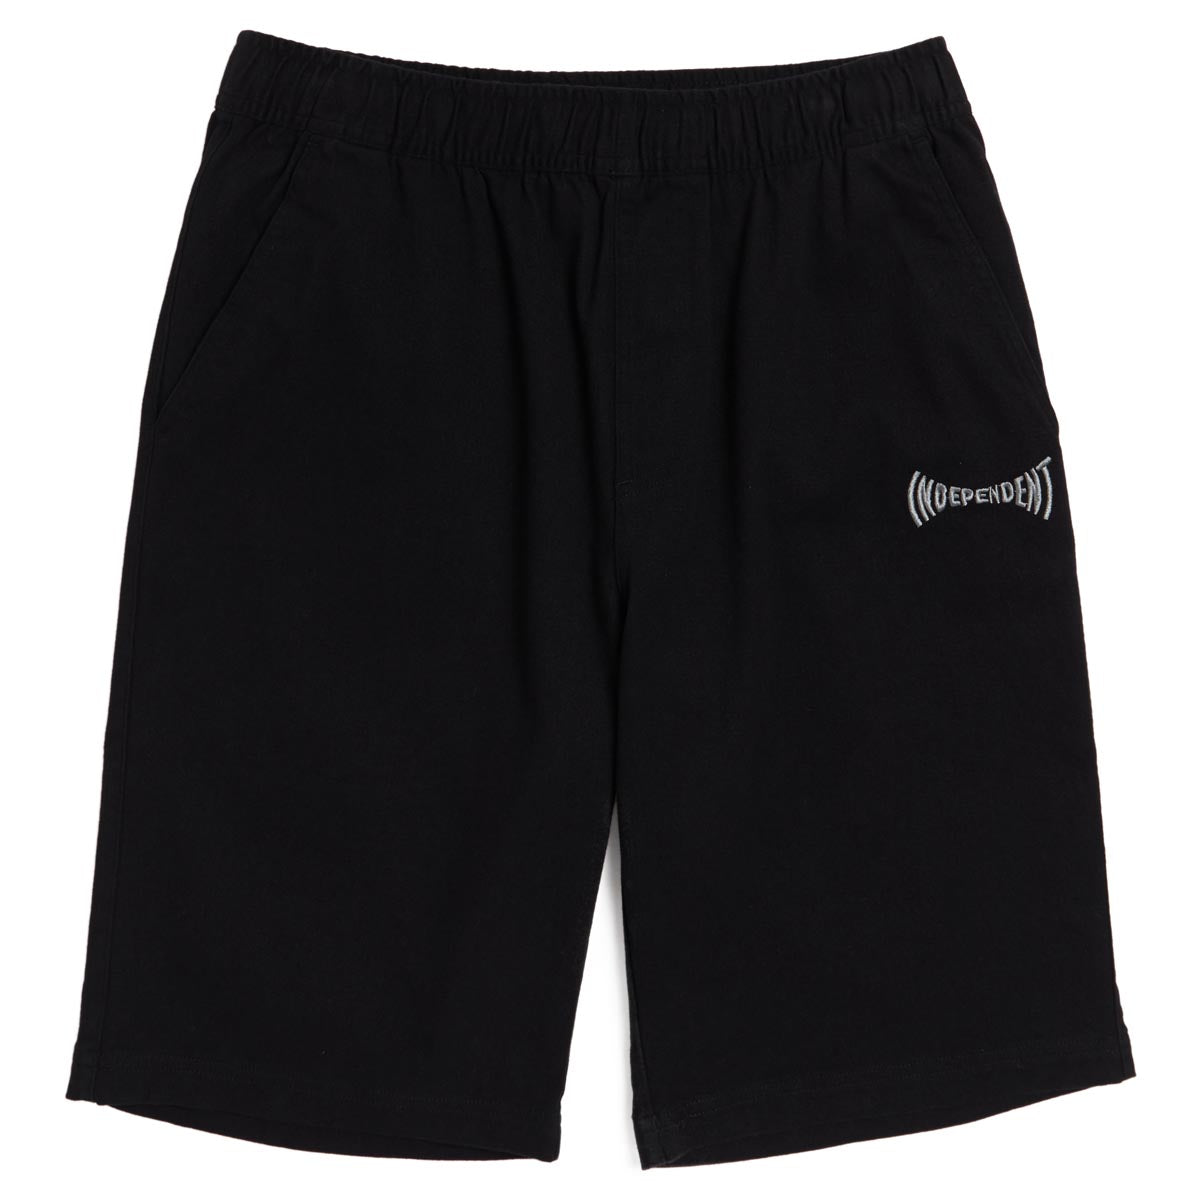 Independent Span Pull On Shorts - Black image 1